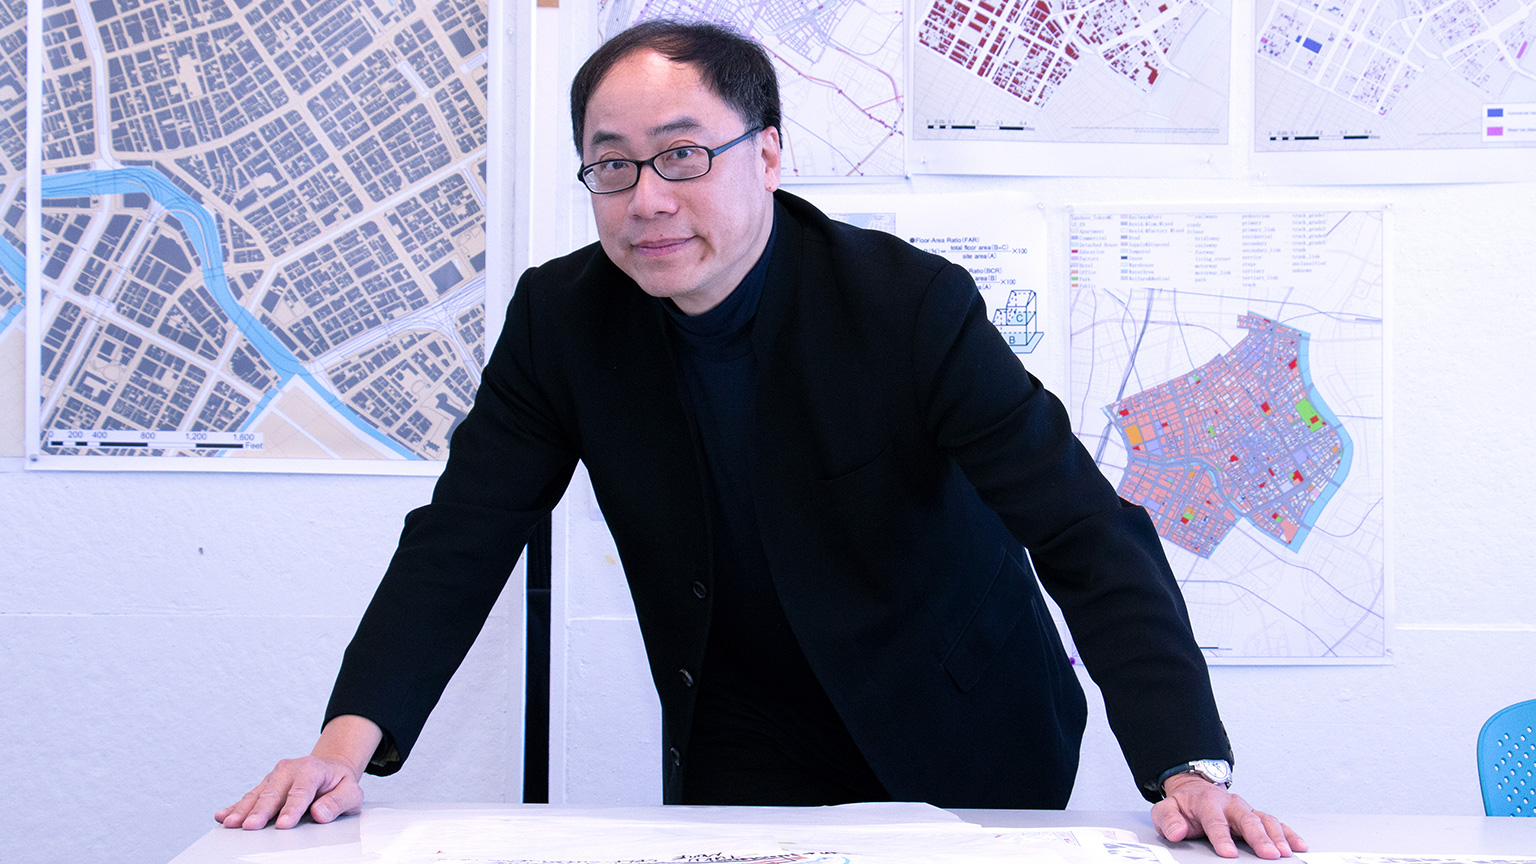 Perry Yang leaning on a table in front of Tokyo Smart City studio designs